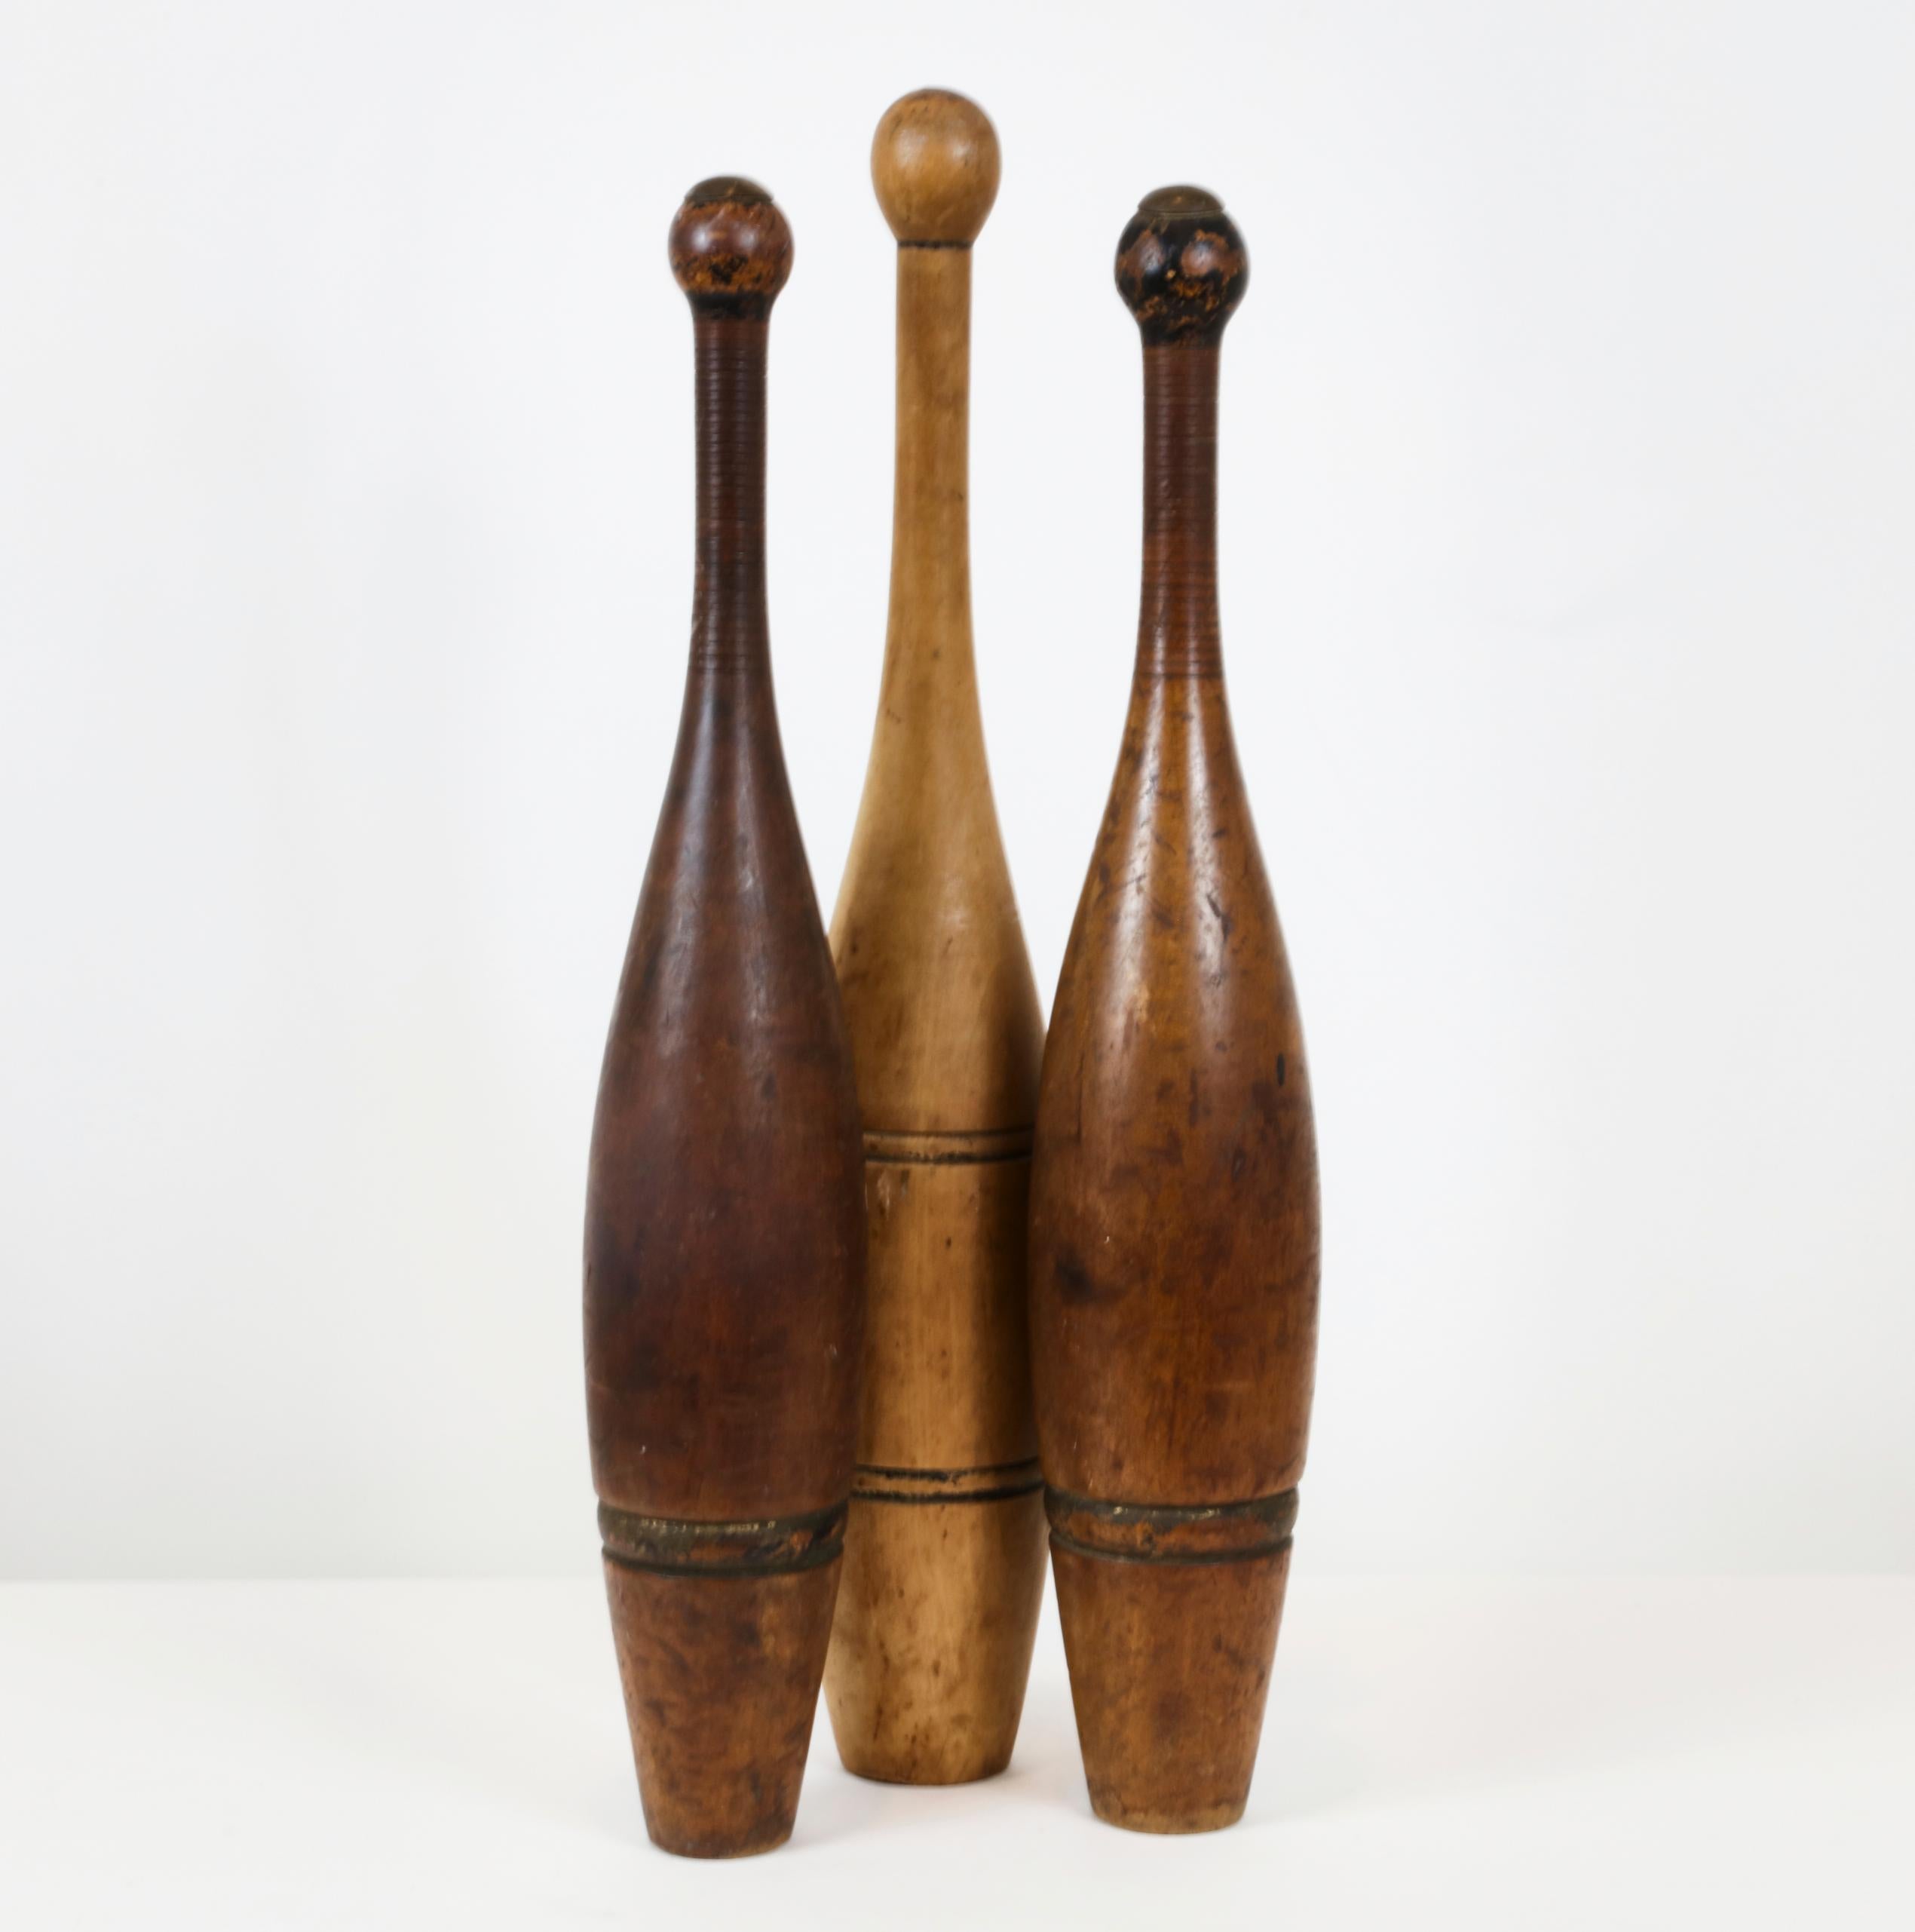 3 wooden antique bowling pins

Size: 20